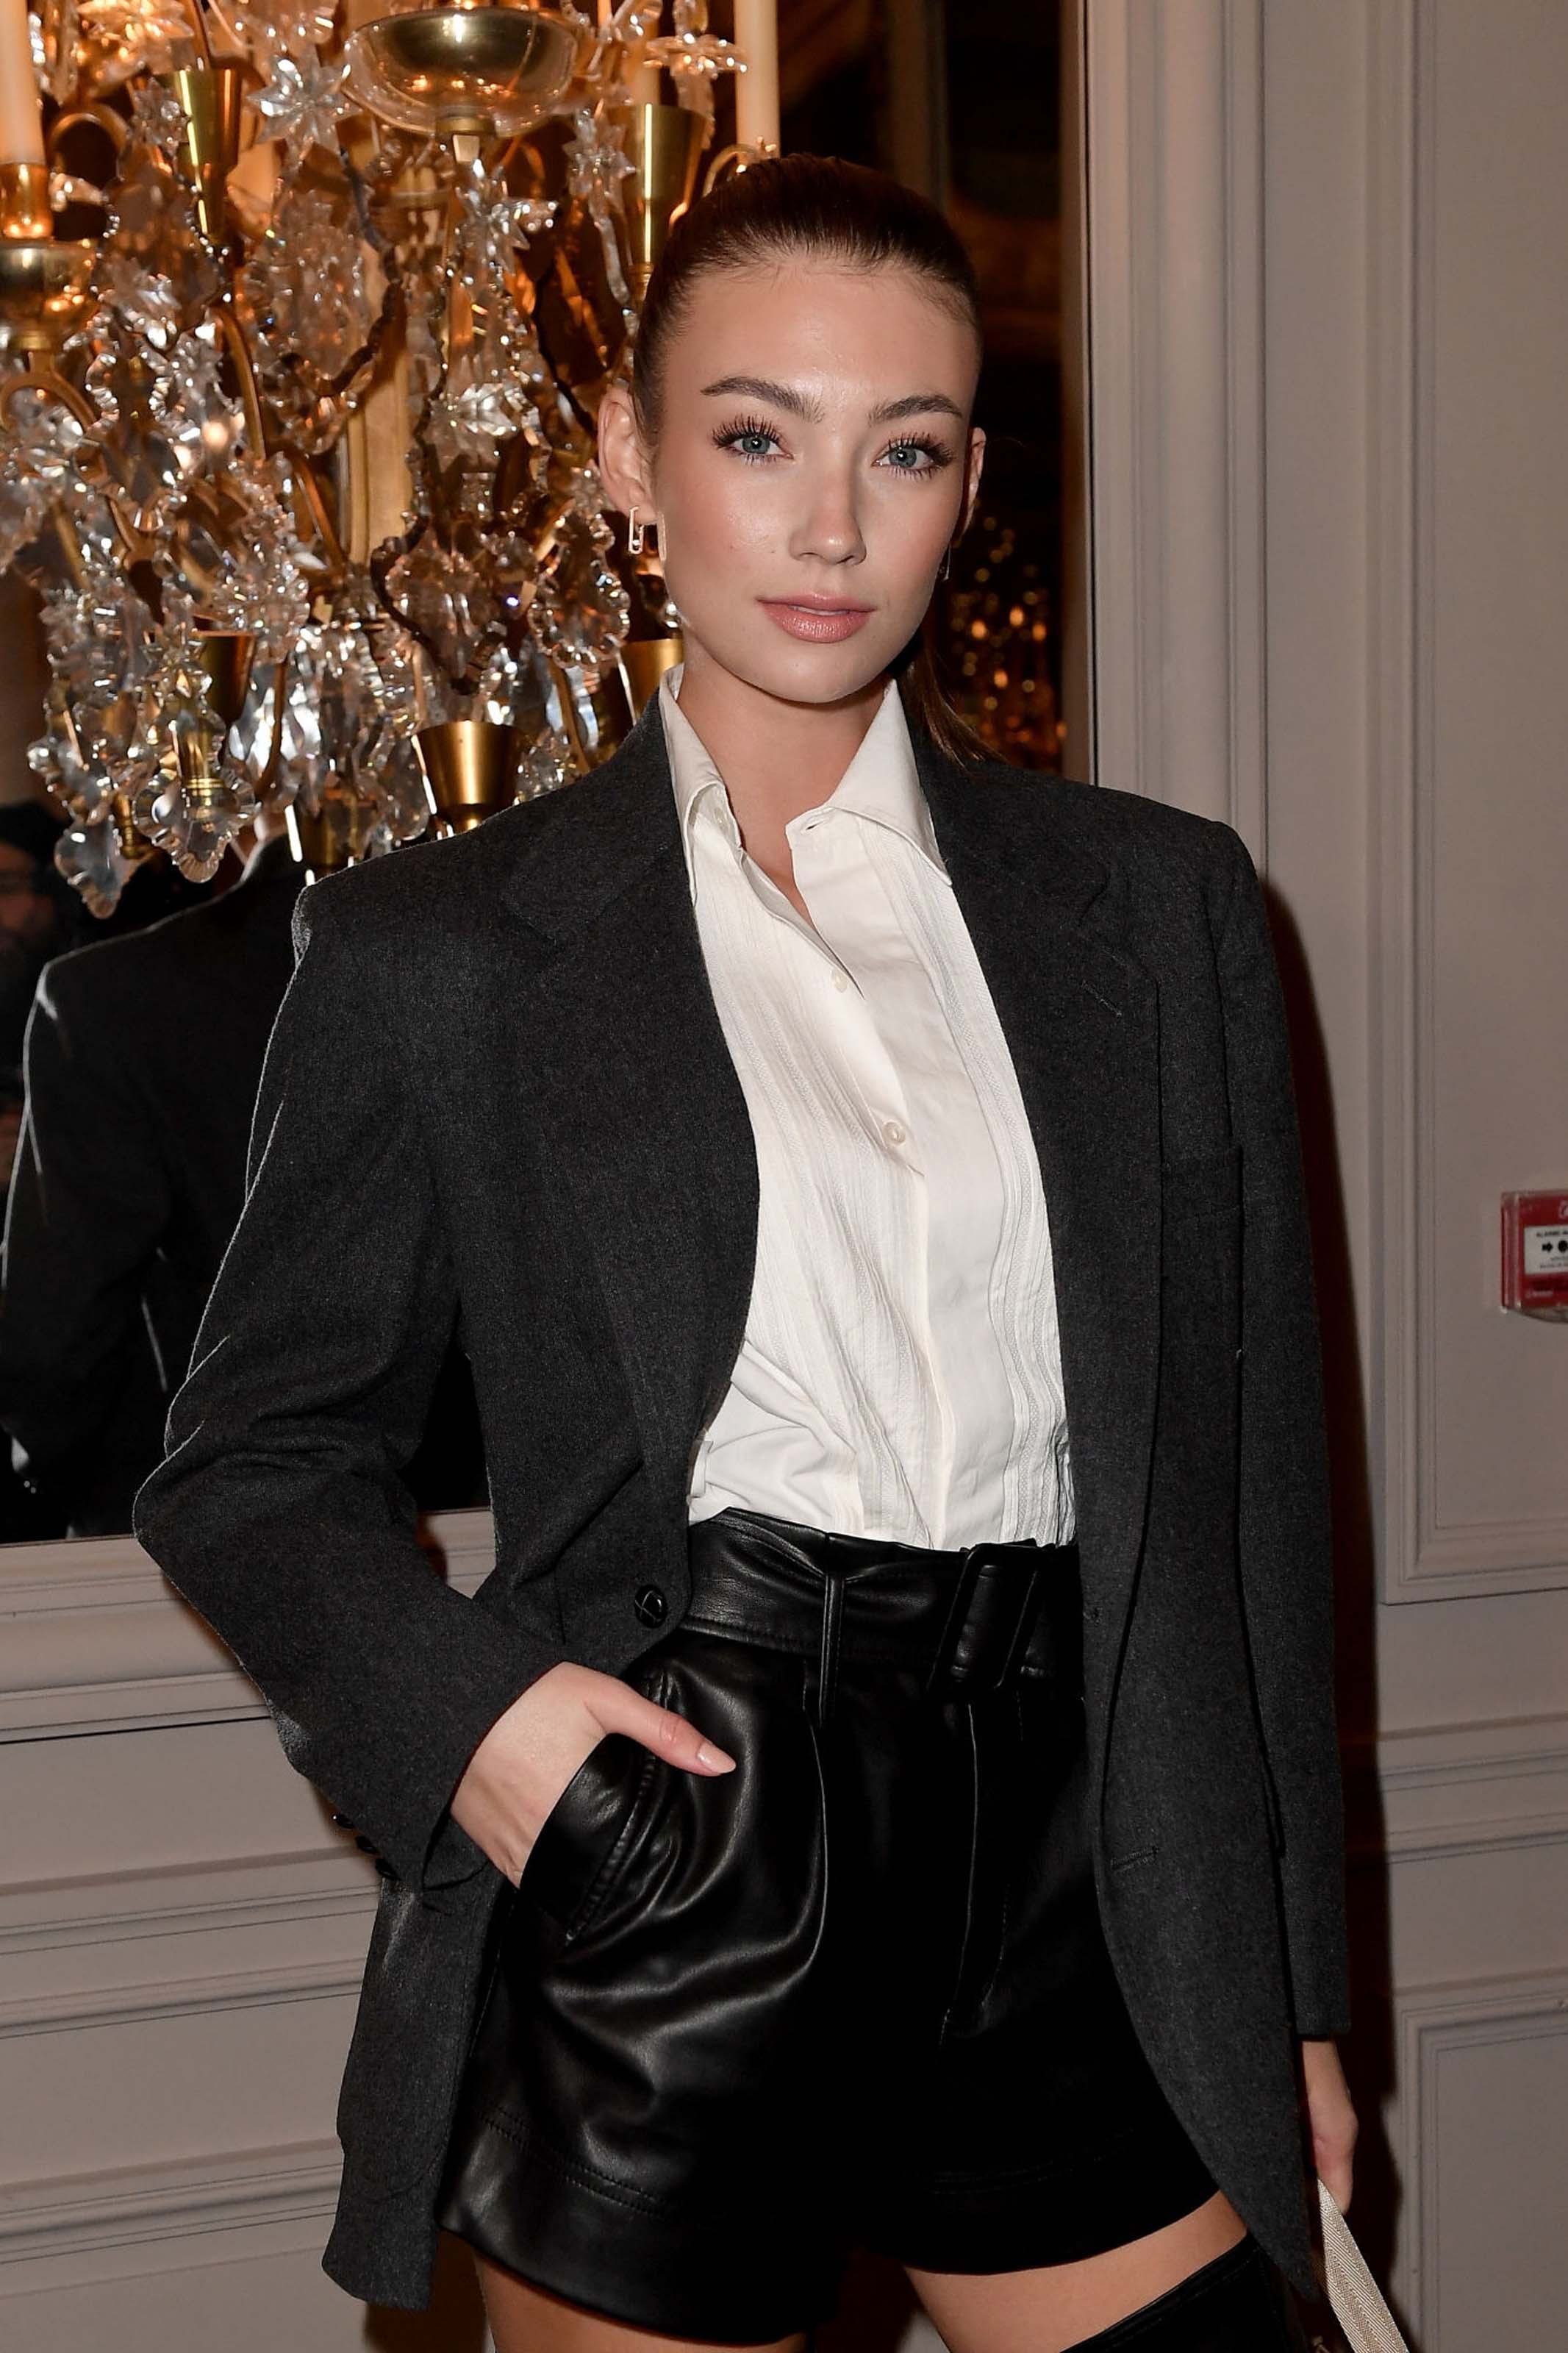 Lorena Rae attends the Monot show as part of the Paris Fashion Week